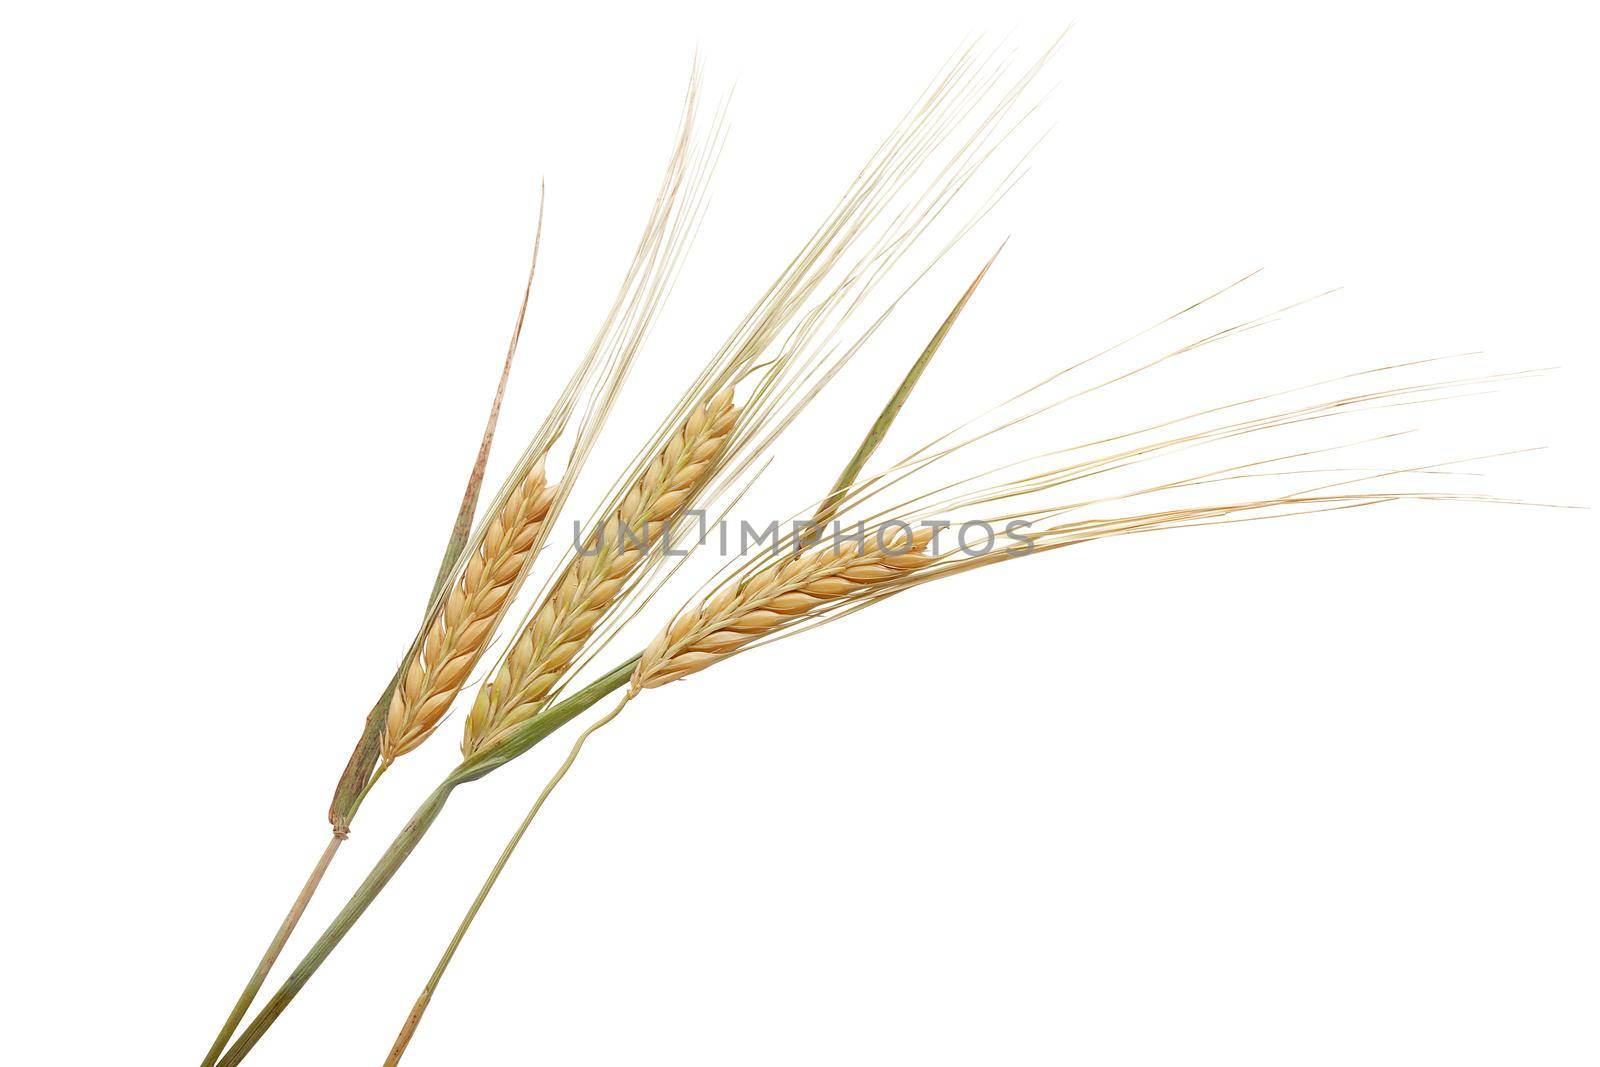 Spikelets of barley by Angorius